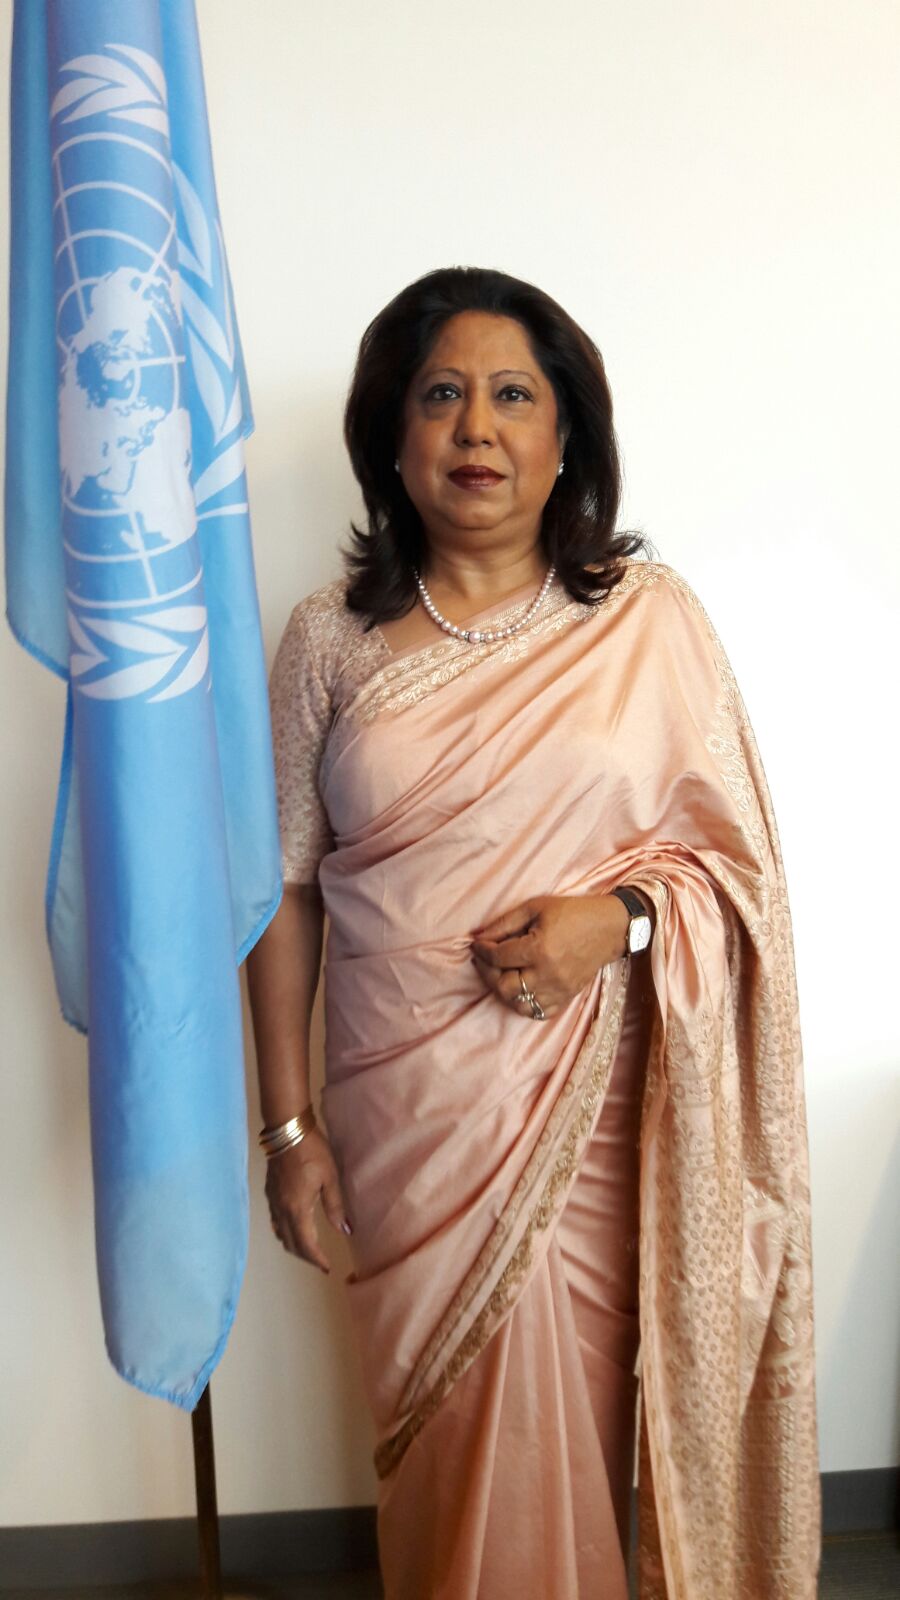 Pramila Patten, Special Representative of the Secretary-General on Sexual Violence in Conflict